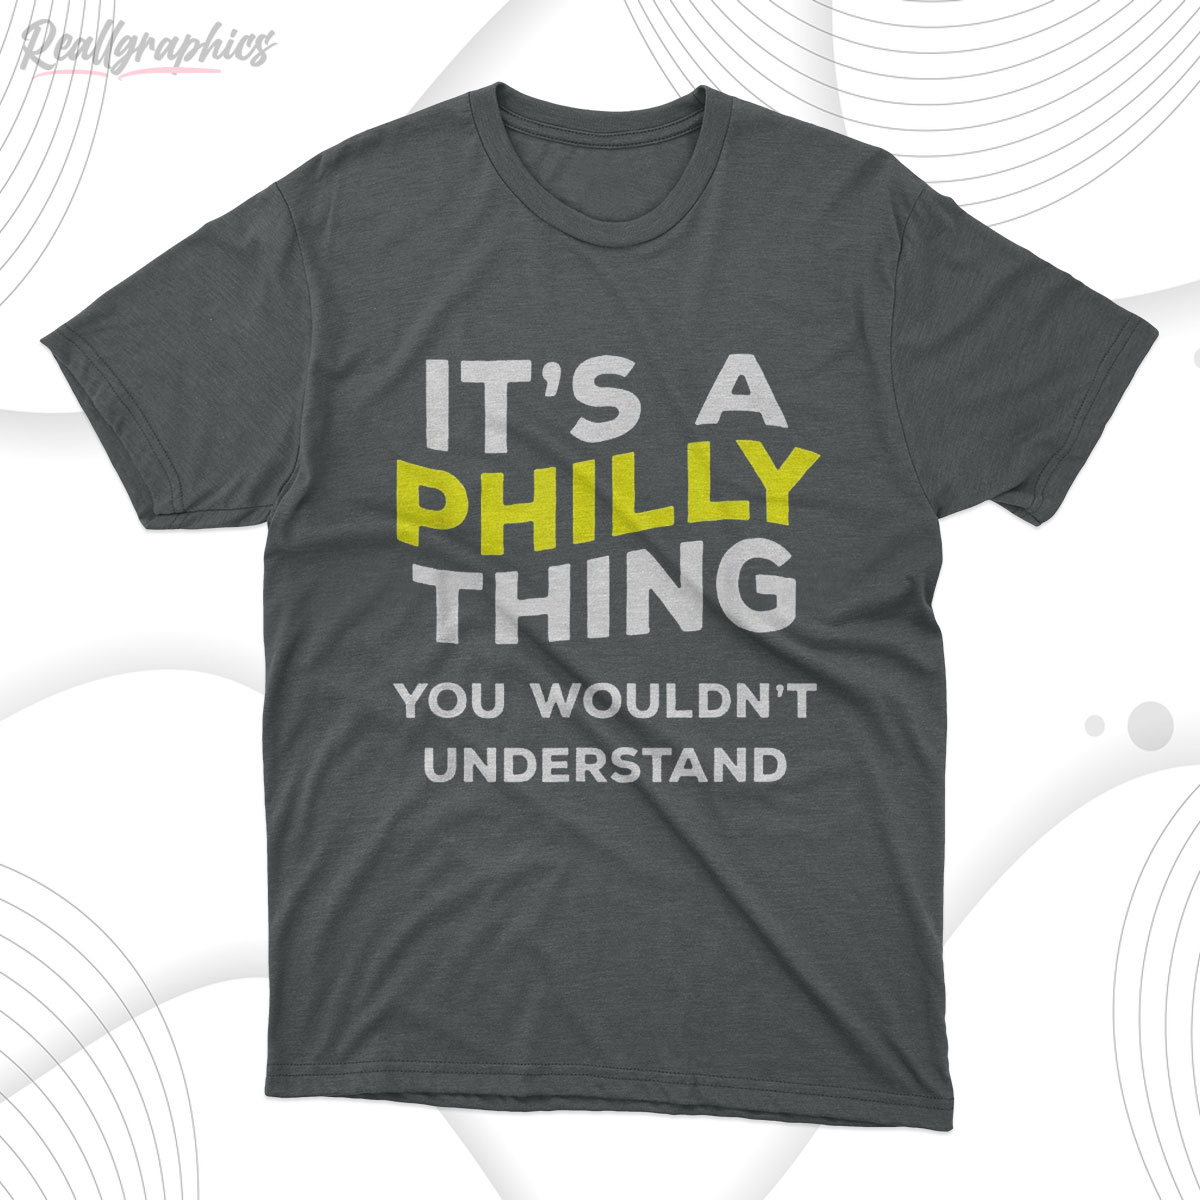 It's A Philly Thing You Wouldn't Understand Shirt (Hoodie, Sweatshirt, T-shirt)